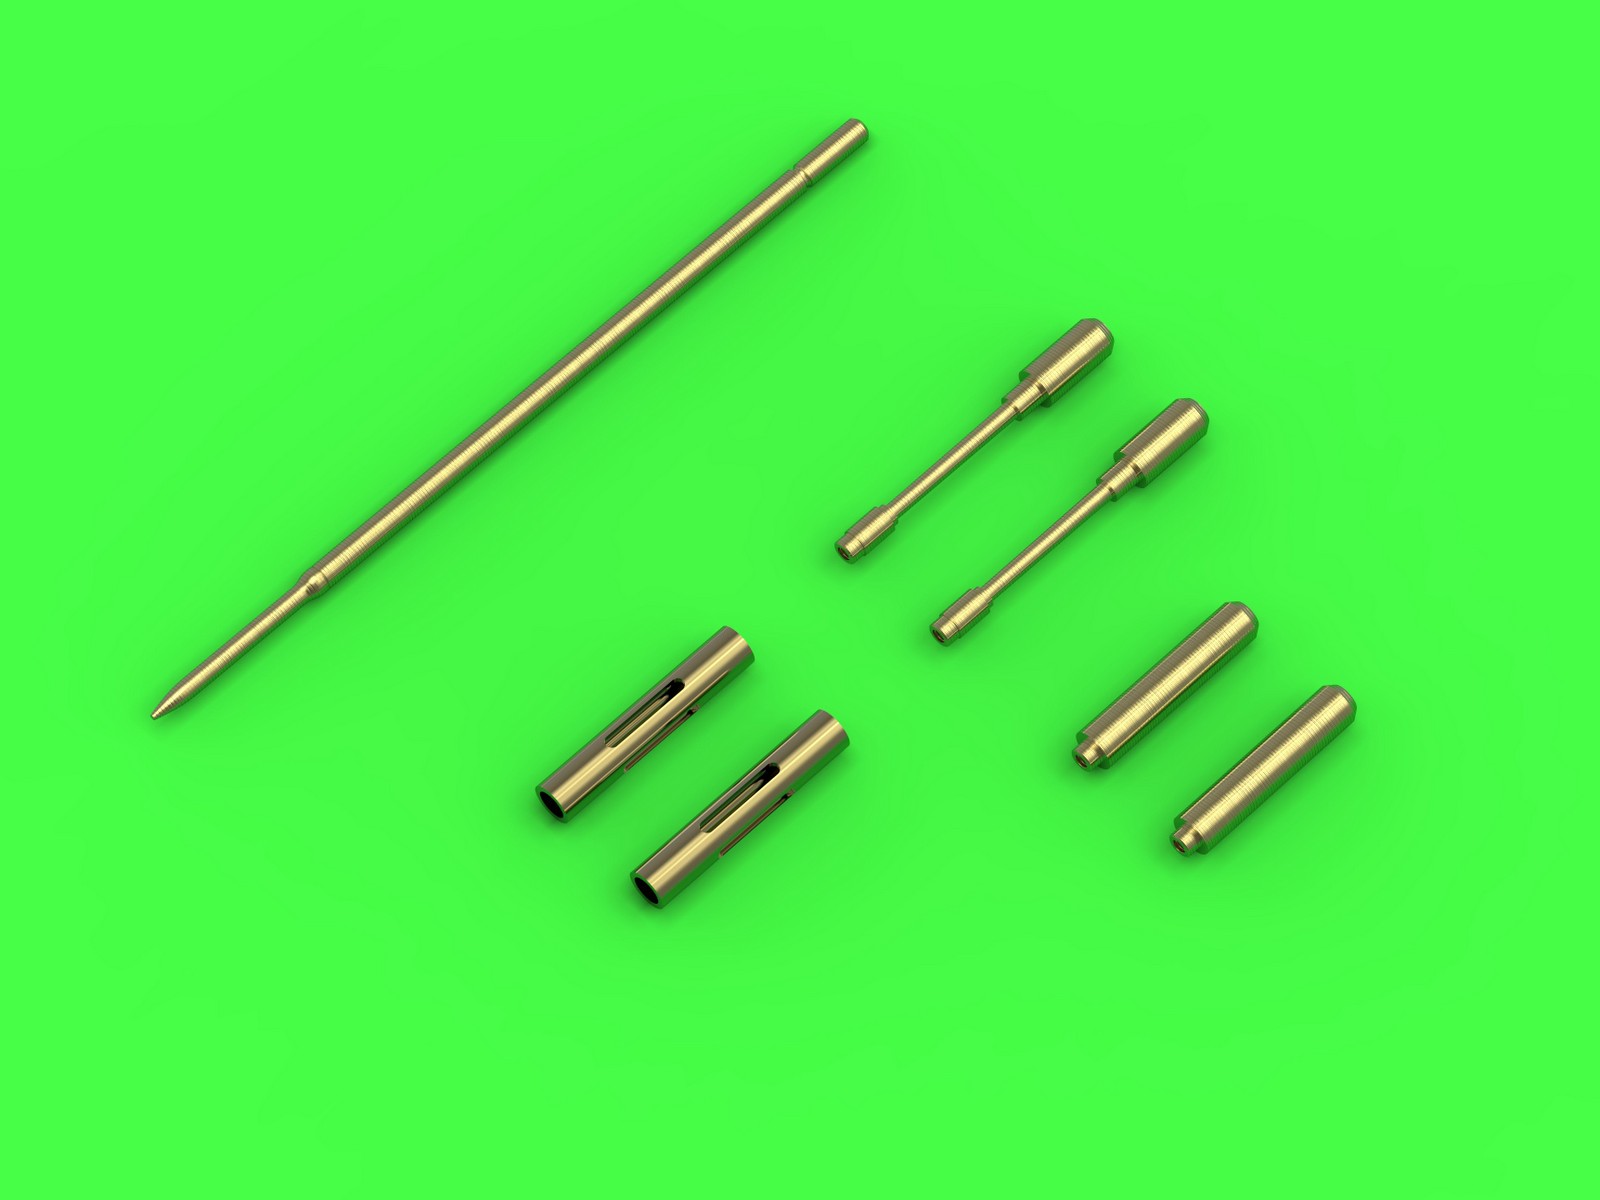 Aircraft detailing sets (brass) 1/72 Grumman F4F-3 Wildcat EARLY (pre-war) - .50 Browning gun barrels with oblong holes & early Pitot Tube 